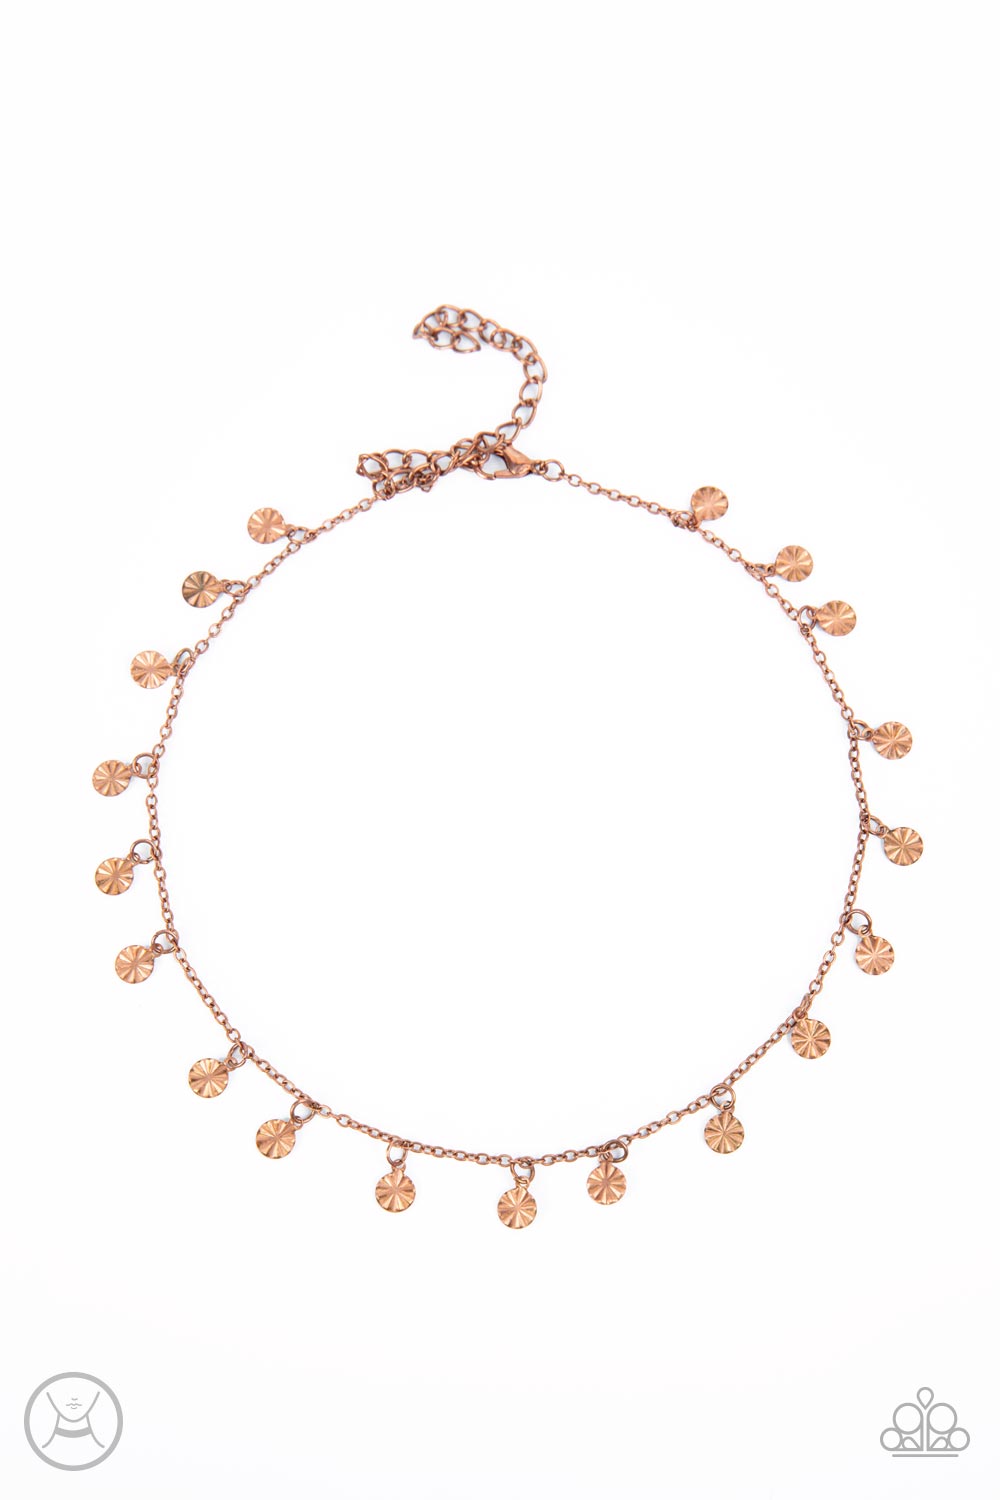 Chiming Charmer Copper Choker Necklace - Paparazzi Accessories  A dainty collection of crinkled copper discs swings from an antiqued copper chain, creating a rustic radiance around the neck. Features an adjustable clasp closure.  Sold as one individual choker necklace. Includes one pair of matching earrings.